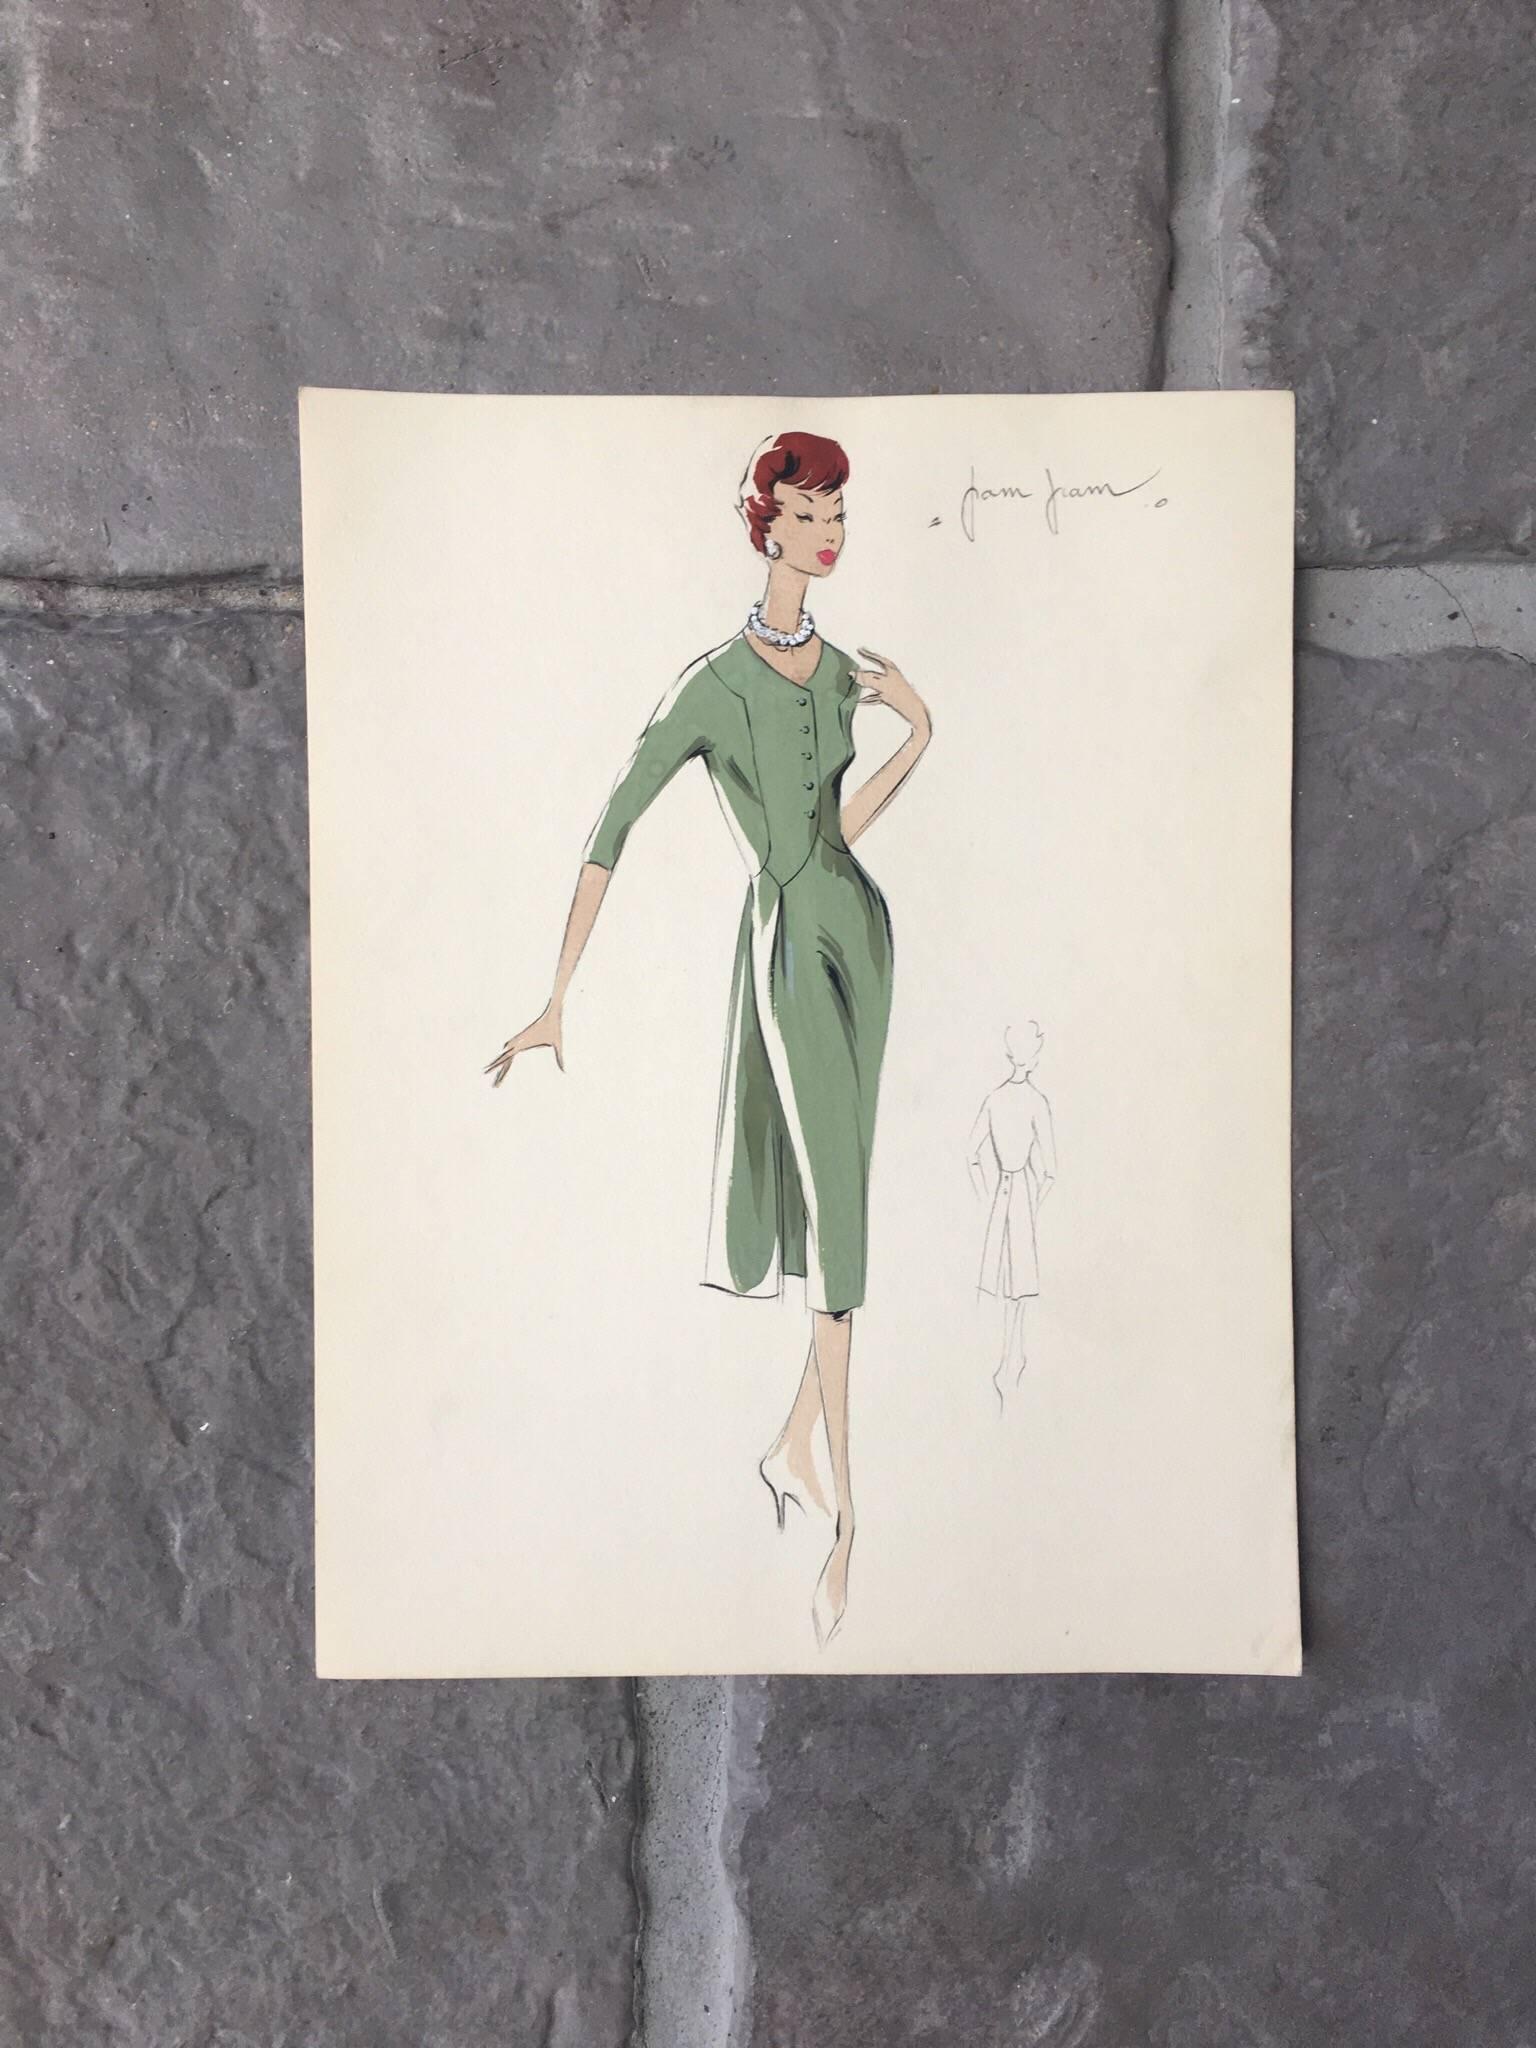 Lady in Elegant 1950's Green Dress Parisian Fashion Illustration Sketch - Painting by Unknown